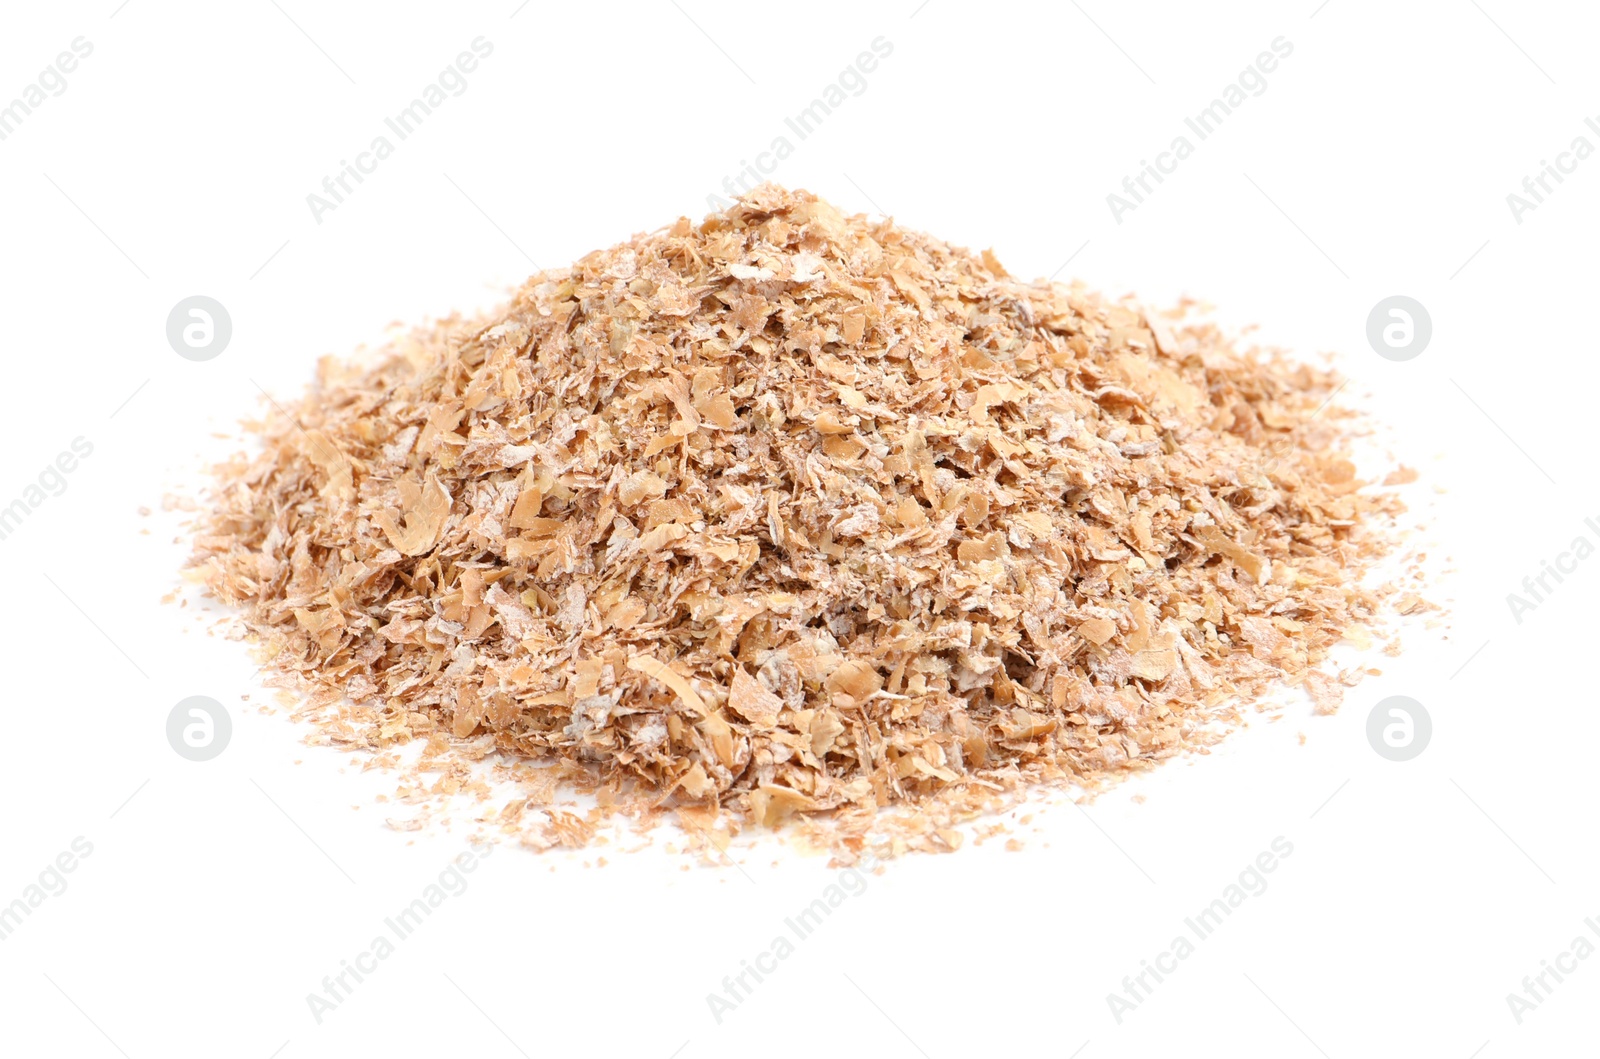 Photo of Pile of wheat bran on white background